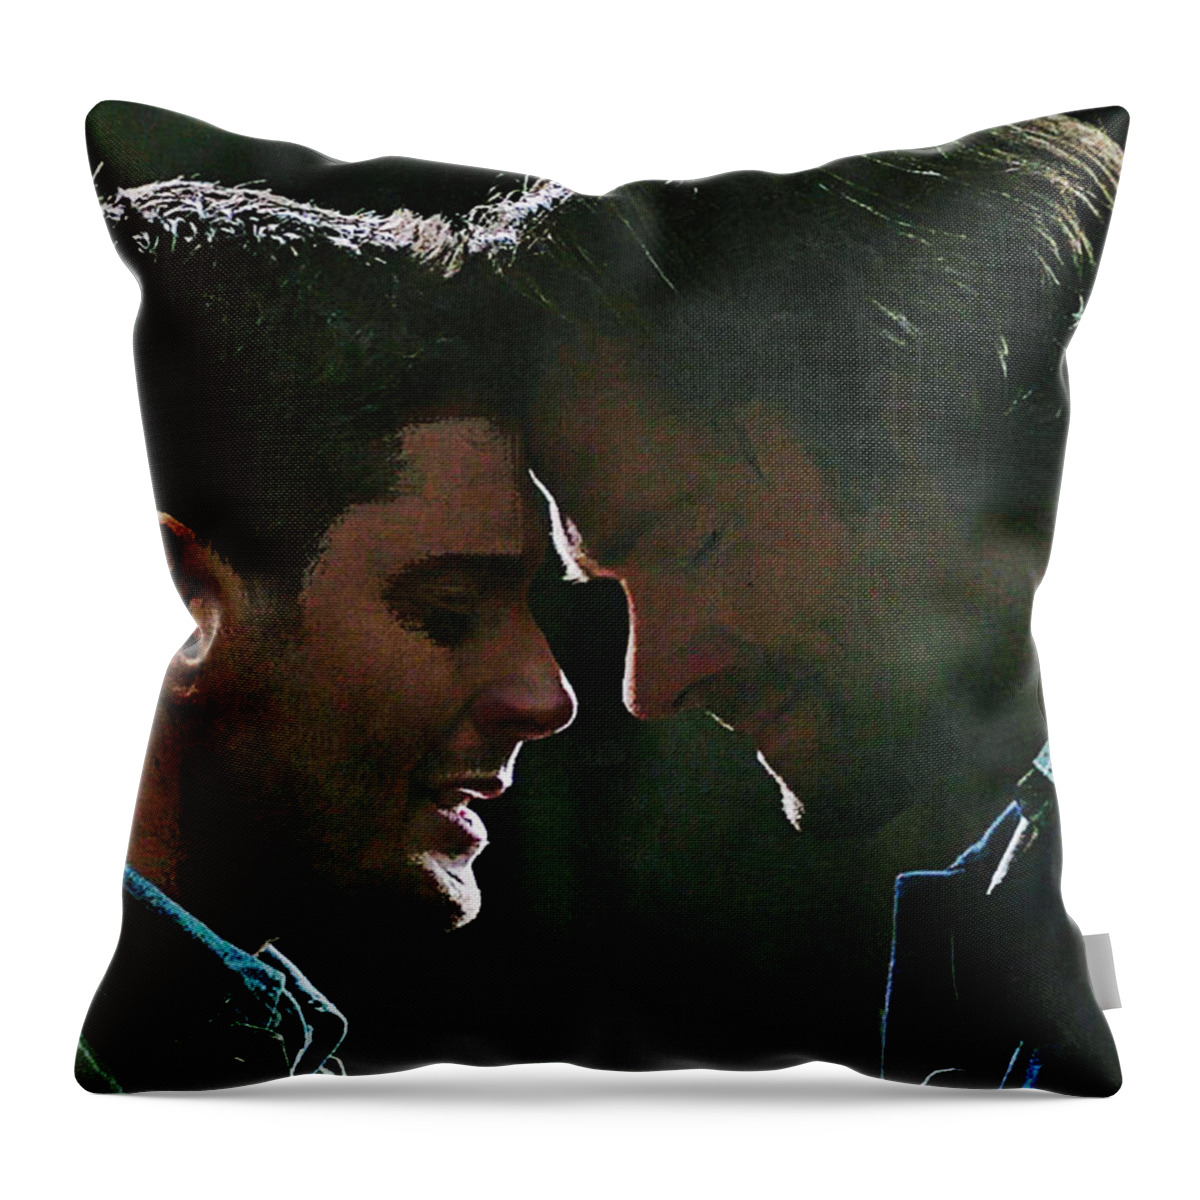 Supernatural Throw Pillow featuring the painting Goodbye by Mark Baranowski